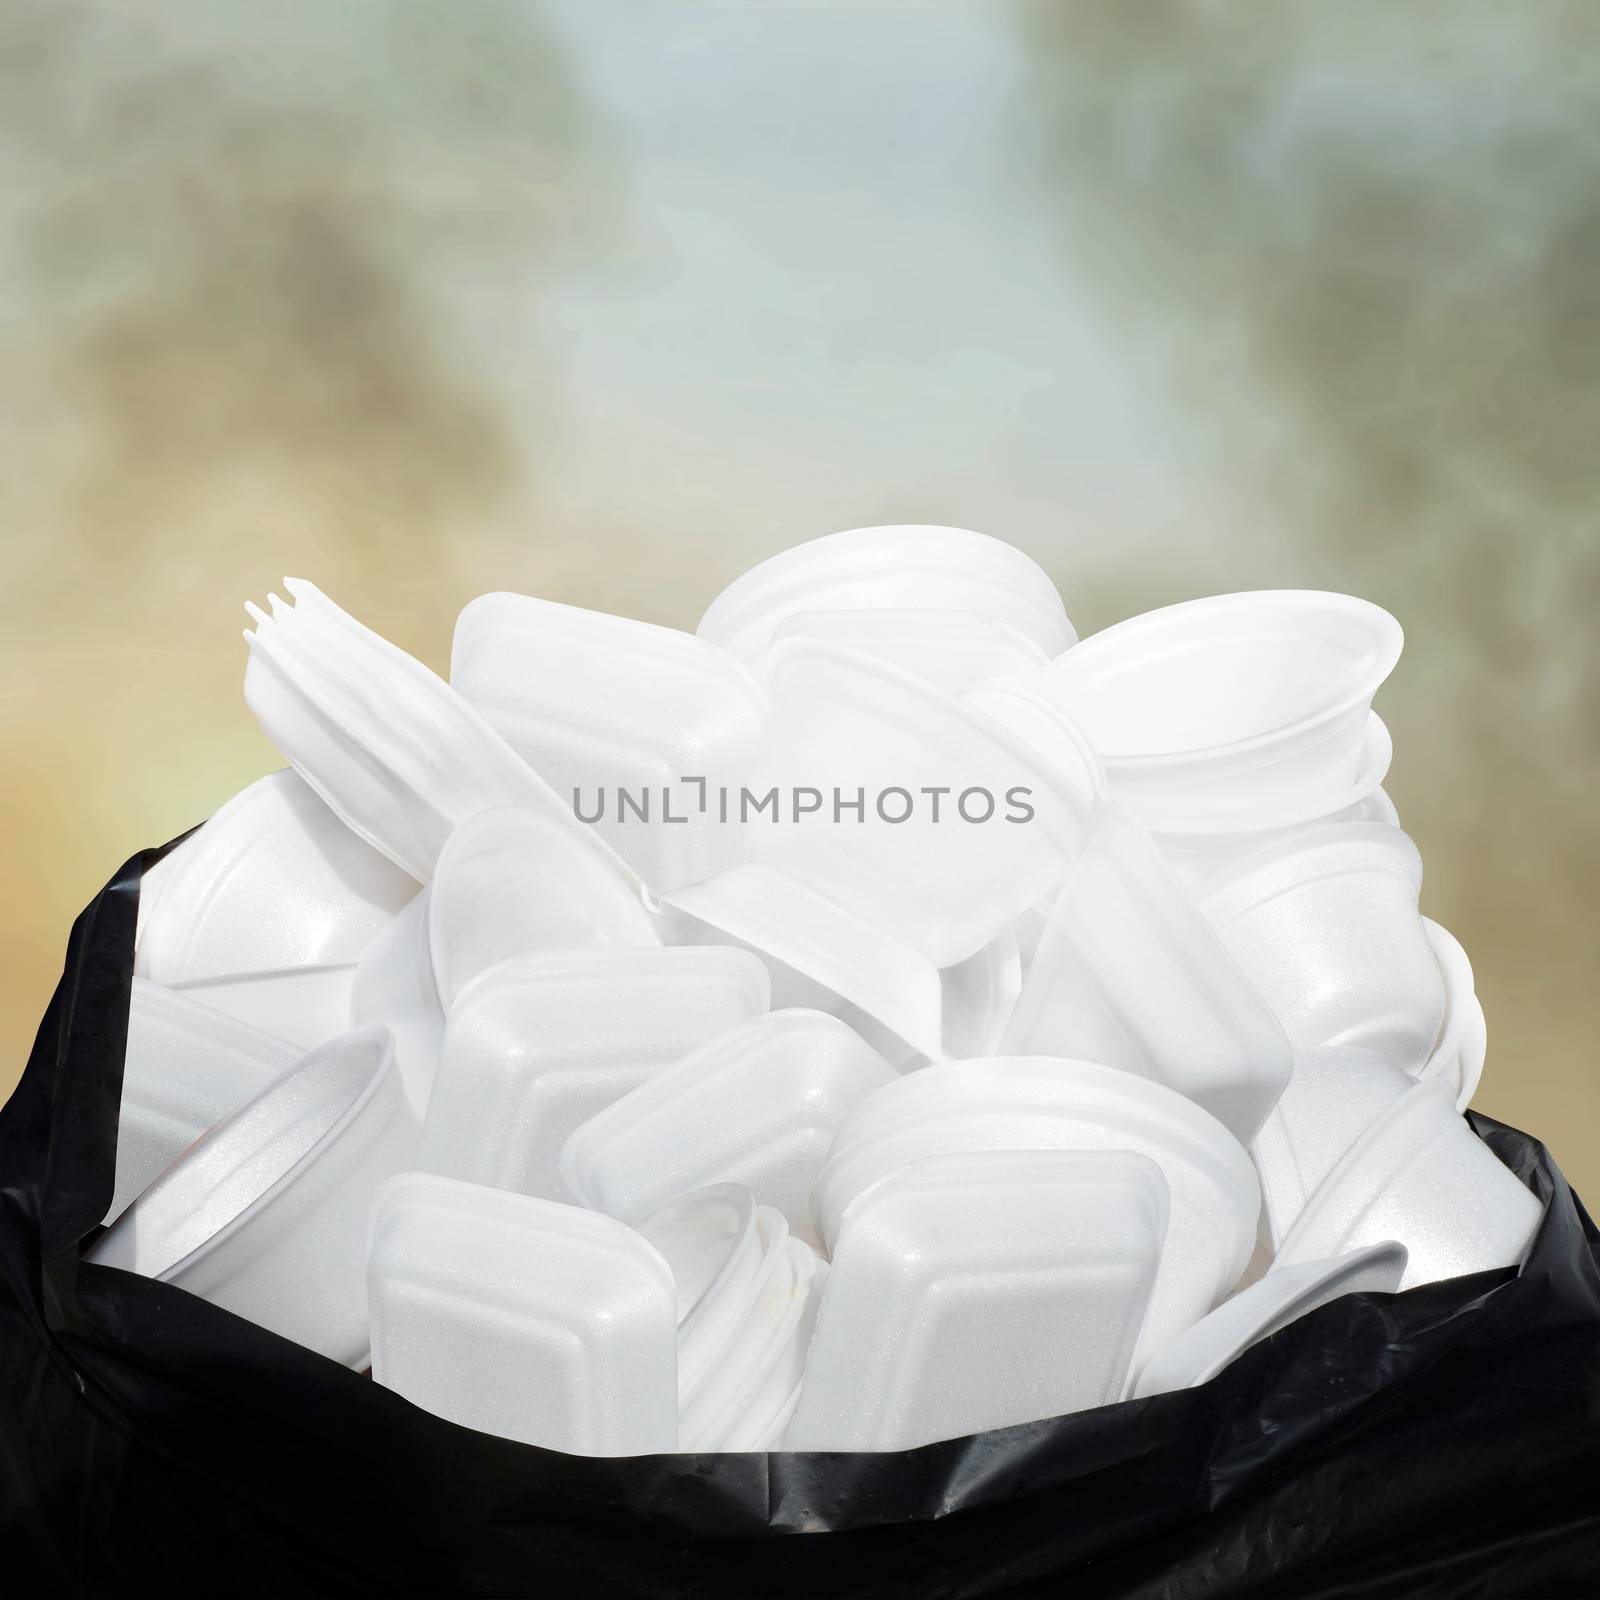 Waste Garbage foam food tray white many pile on the plastic black bag dirty on sky cloud air atmosphere pollution background by cgdeaw